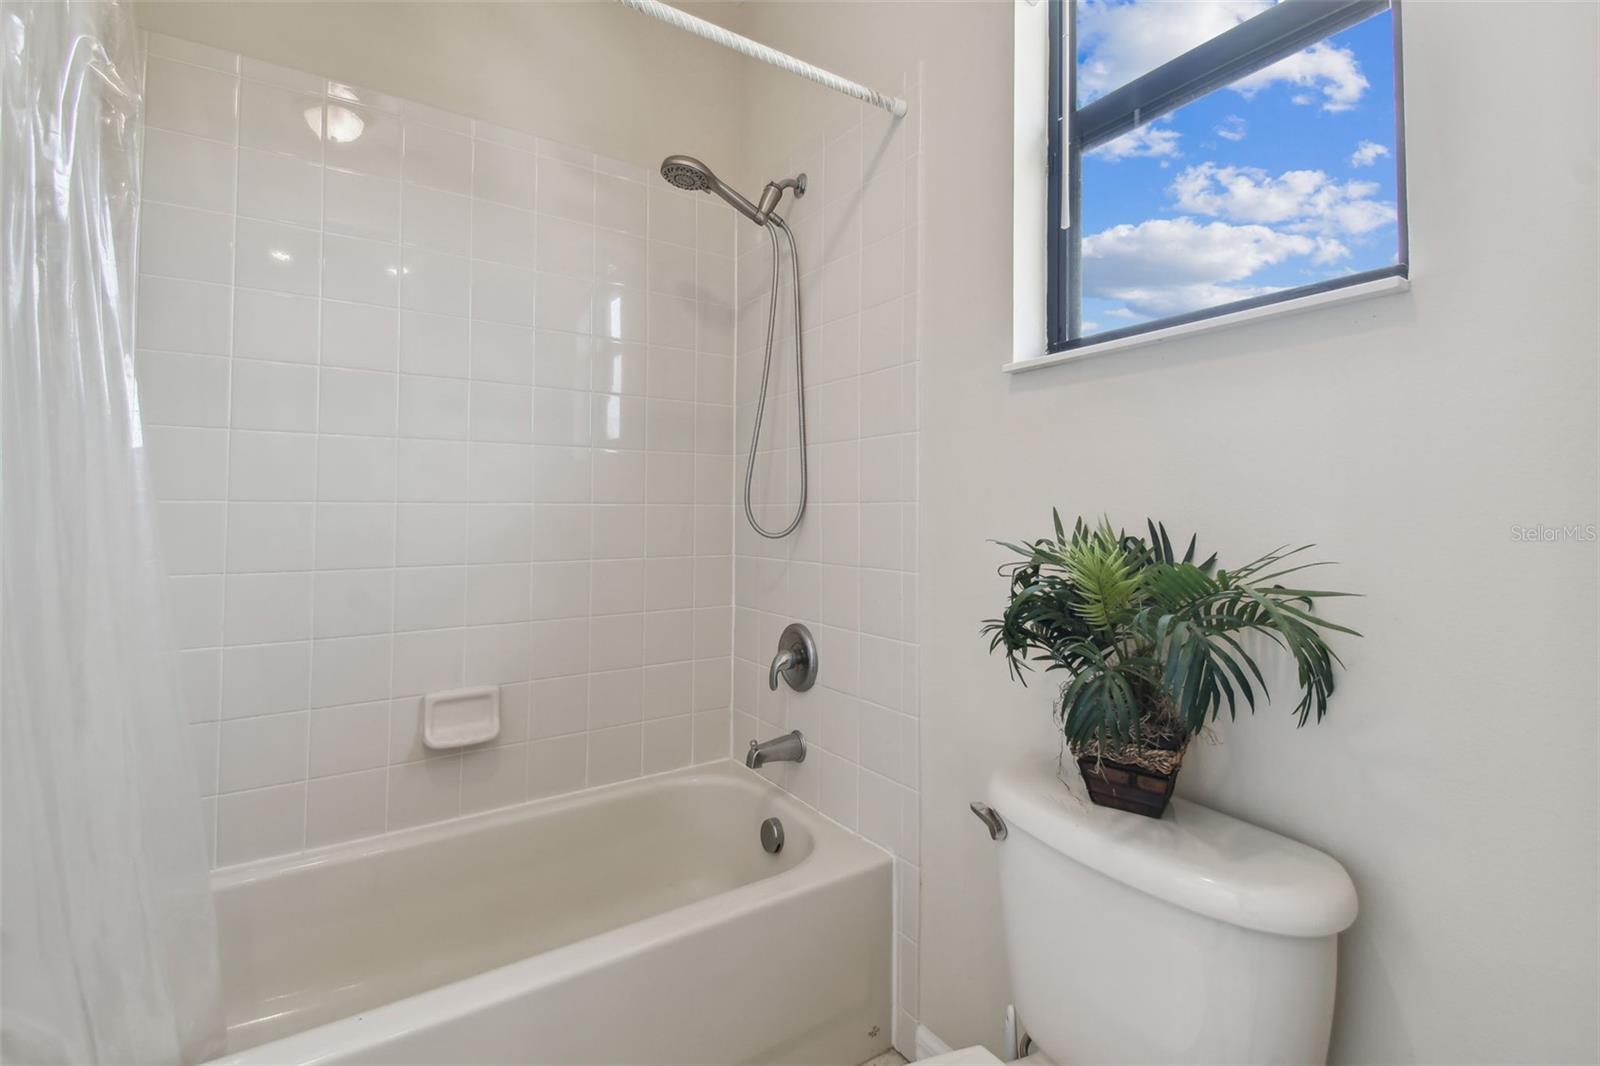 Immaculately maintained bathroom